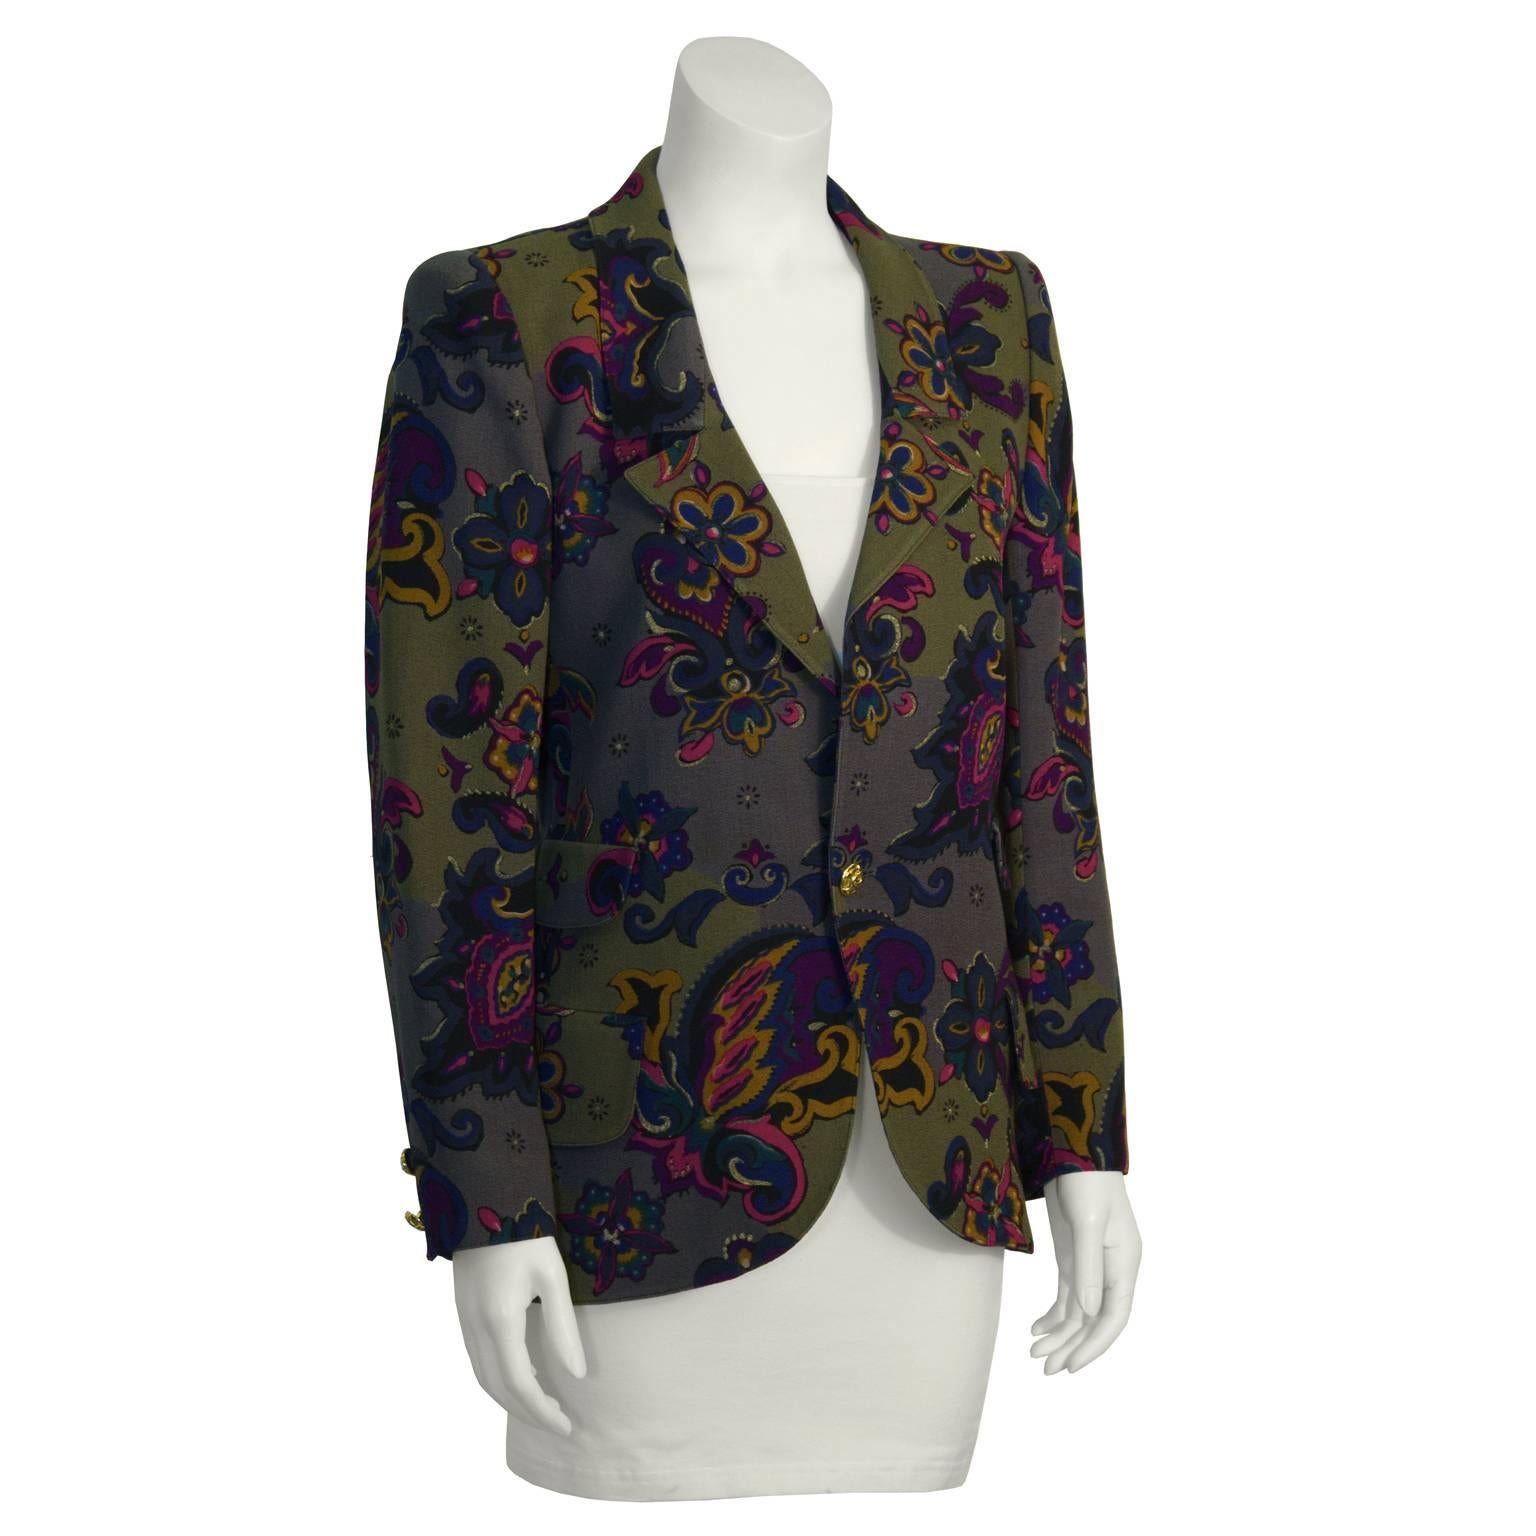 Funky Ungaro khaki floral blazer from the 1980's featuring notched lapels, a single button closure and two patch pockets at the hip. Gold plate button with ornamentation. Paisley print has notes of magenta, purple, teal and mustard. Amazing way to